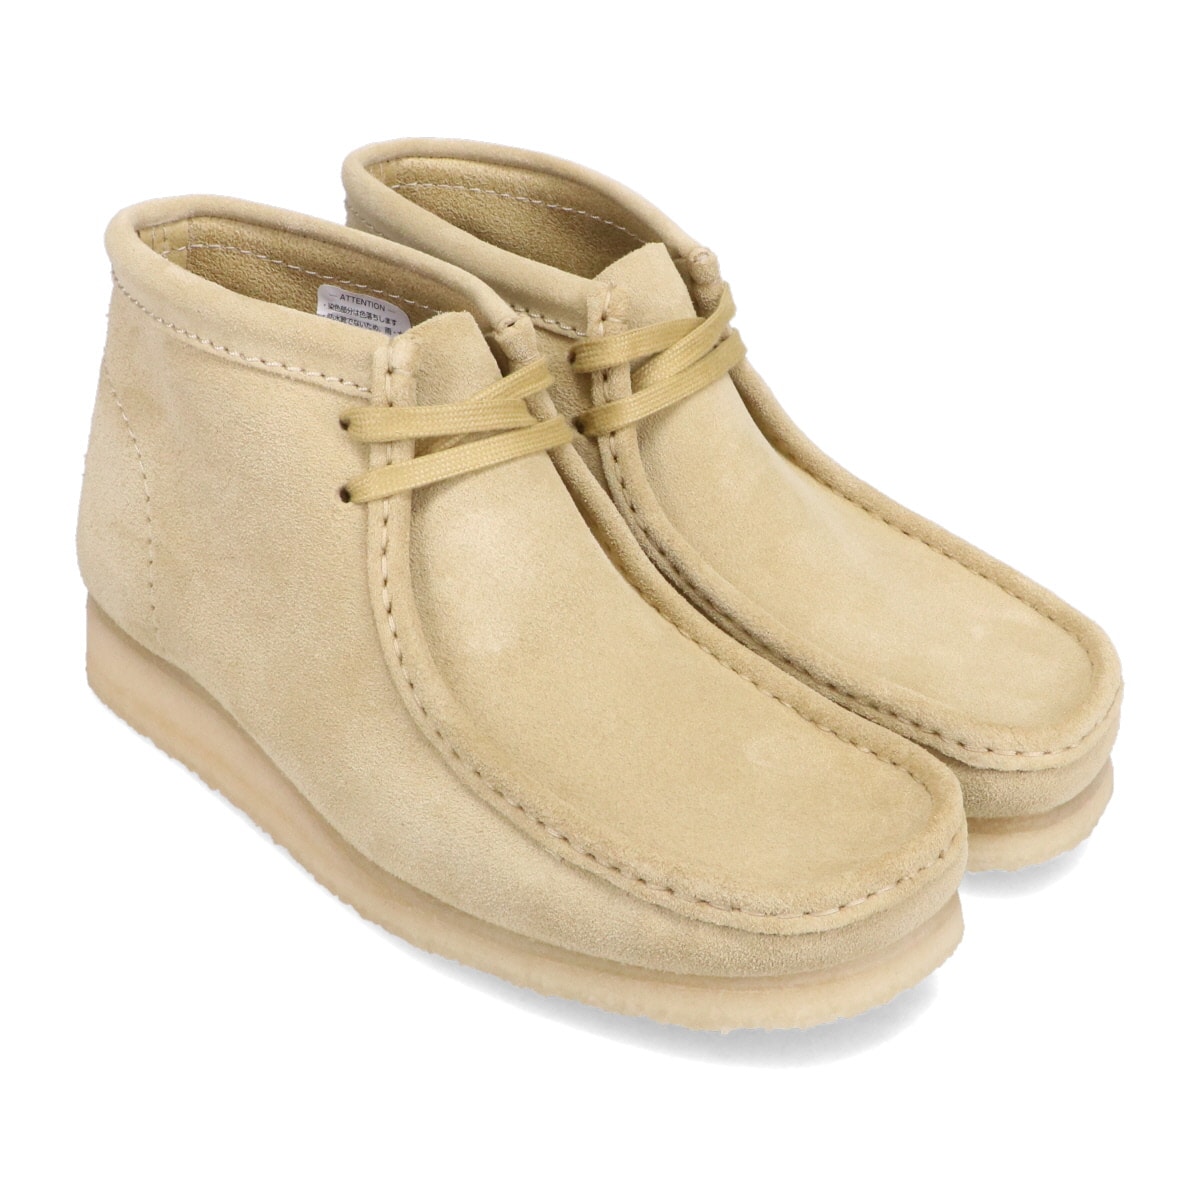 Clarks Wallabee Boot Maple Suede Maple Suede 24SP-I_photo_large